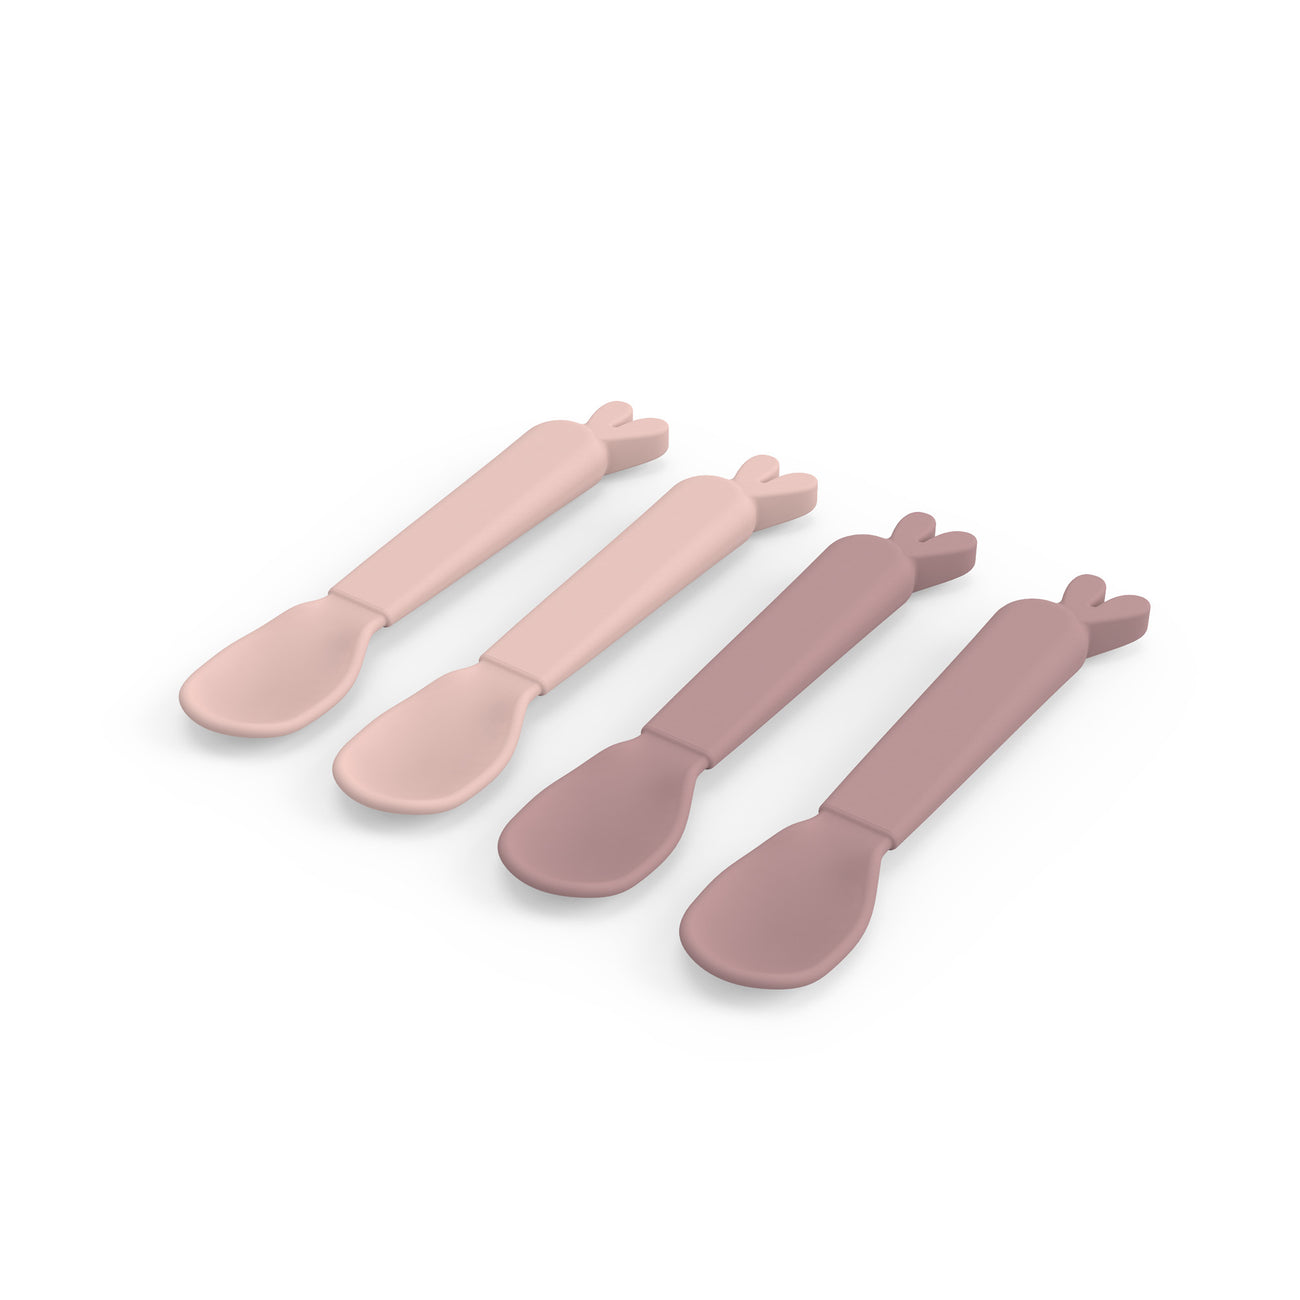 Kiddish-spoon-4-pack-Lalee-Powder-Front-2_1300x